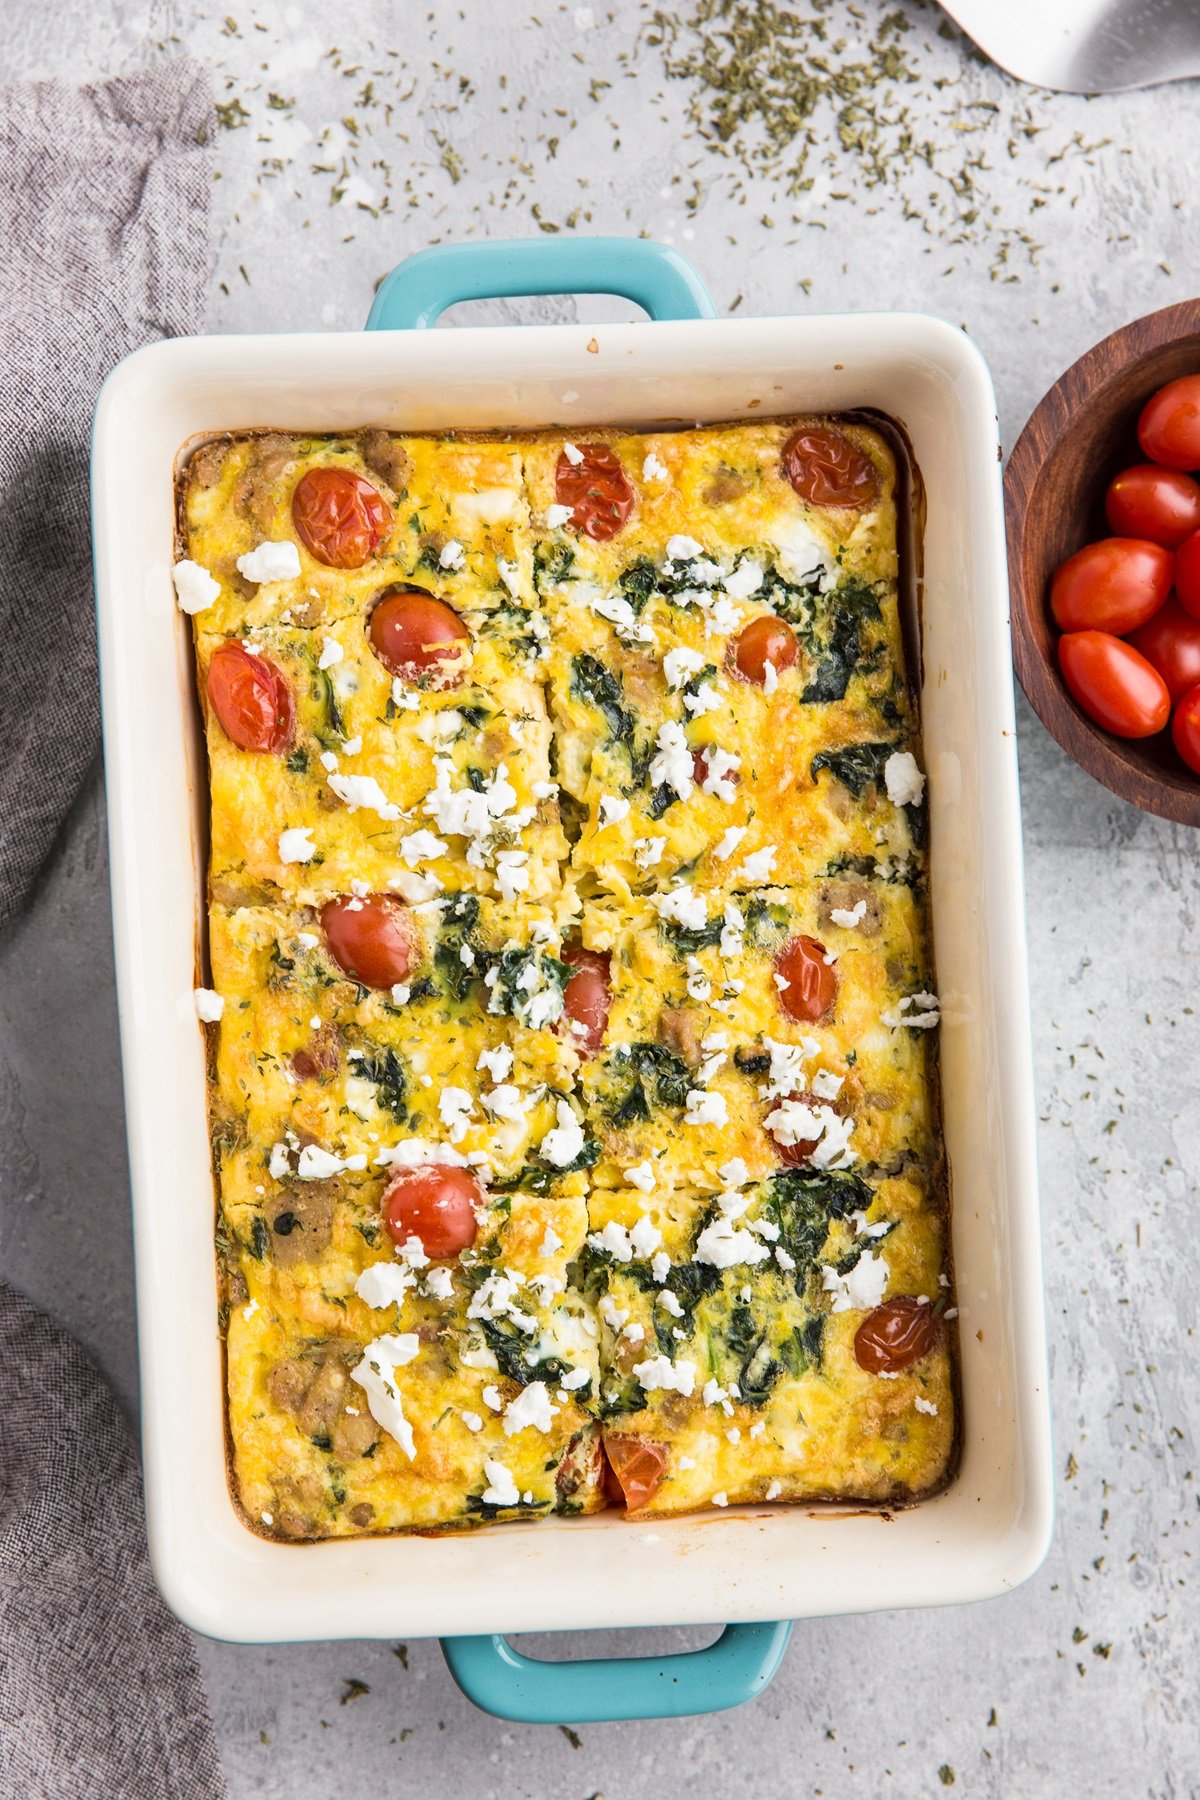 Mediterranean Breakfast Casserole - Low-carb egg casserole (or crustless quiche/frittata) with chicken sausage, feta cheese, tomatoes and kale - easy, flavorful and delicious!